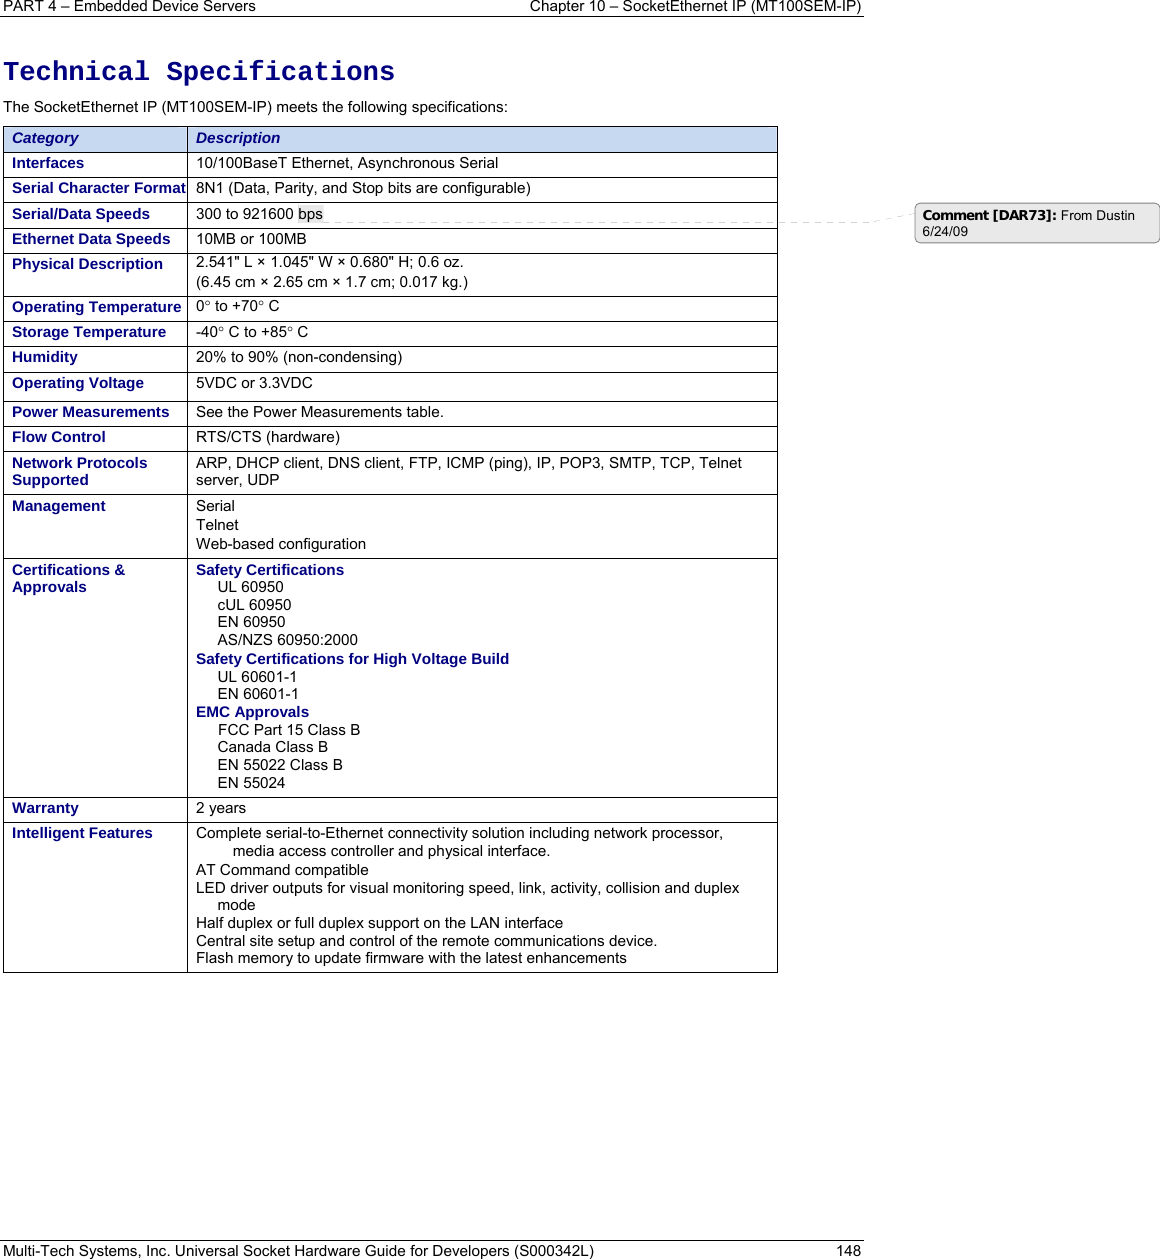 PART 4 – Embedded Device Servers  Chapter 10 – SocketEthernet IP (MT100SEM-IP)  Multi-Tech Systems, Inc. Universal Socket Hardware Guide for Developers (S000342L)  148   Technical Specifications The SocketEthernet IP (MT100SEM-IP) meets the following specifications: Category  Description Interfaces  10/100BaseT Ethernet, Asynchronous Serial Serial Character Format  8N1 (Data, Parity, and Stop bits are configurable) Serial/Data Speeds  300 to 921600 bps Ethernet Data Speeds  10MB or 100MB Physical Description  2.541&quot; L × 1.045&quot; W × 0.680&quot; H; 0.6 oz. (6.45 cm × 2.65 cm × 1.7 cm; 0.017 kg.) Operating Temperature  0 to +70 C  Storage Temperature  -40 C to +85 C Humidity  20% to 90% (non-condensing) Operating Voltage   5VDC or 3.3VDC Power Measurements  See the Power Measurements table.  Flow Control  RTS/CTS (hardware) Network Protocols Supported  ARP, DHCP client, DNS client, FTP, ICMP (ping), IP, POP3, SMTP, TCP, Telnet server, UDP Management  Serial  Telnet  Web-based configuration  Certifications &amp; Approvals  Safety Certifications UL 60950 cUL 60950 EN 60950 AS/NZS 60950:2000  Safety Certifications for High Voltage Build UL 60601-1 EN 60601-1 EMC Approvals FCC Part 15 Class B Canada Class B EN 55022 Class B EN 55024 Warranty  2 years Intelligent Features  Complete serial-to-Ethernet connectivity solution including network processor, media access controller and physical interface. AT Command compatible  LED driver outputs for visual monitoring speed, link, activity, collision and duplex mode Half duplex or full duplex support on the LAN interface Central site setup and control of the remote communications device.  Flash memory to update firmware with the latest enhancements  Comment [DAR73]: From Dustin 6/24/09 